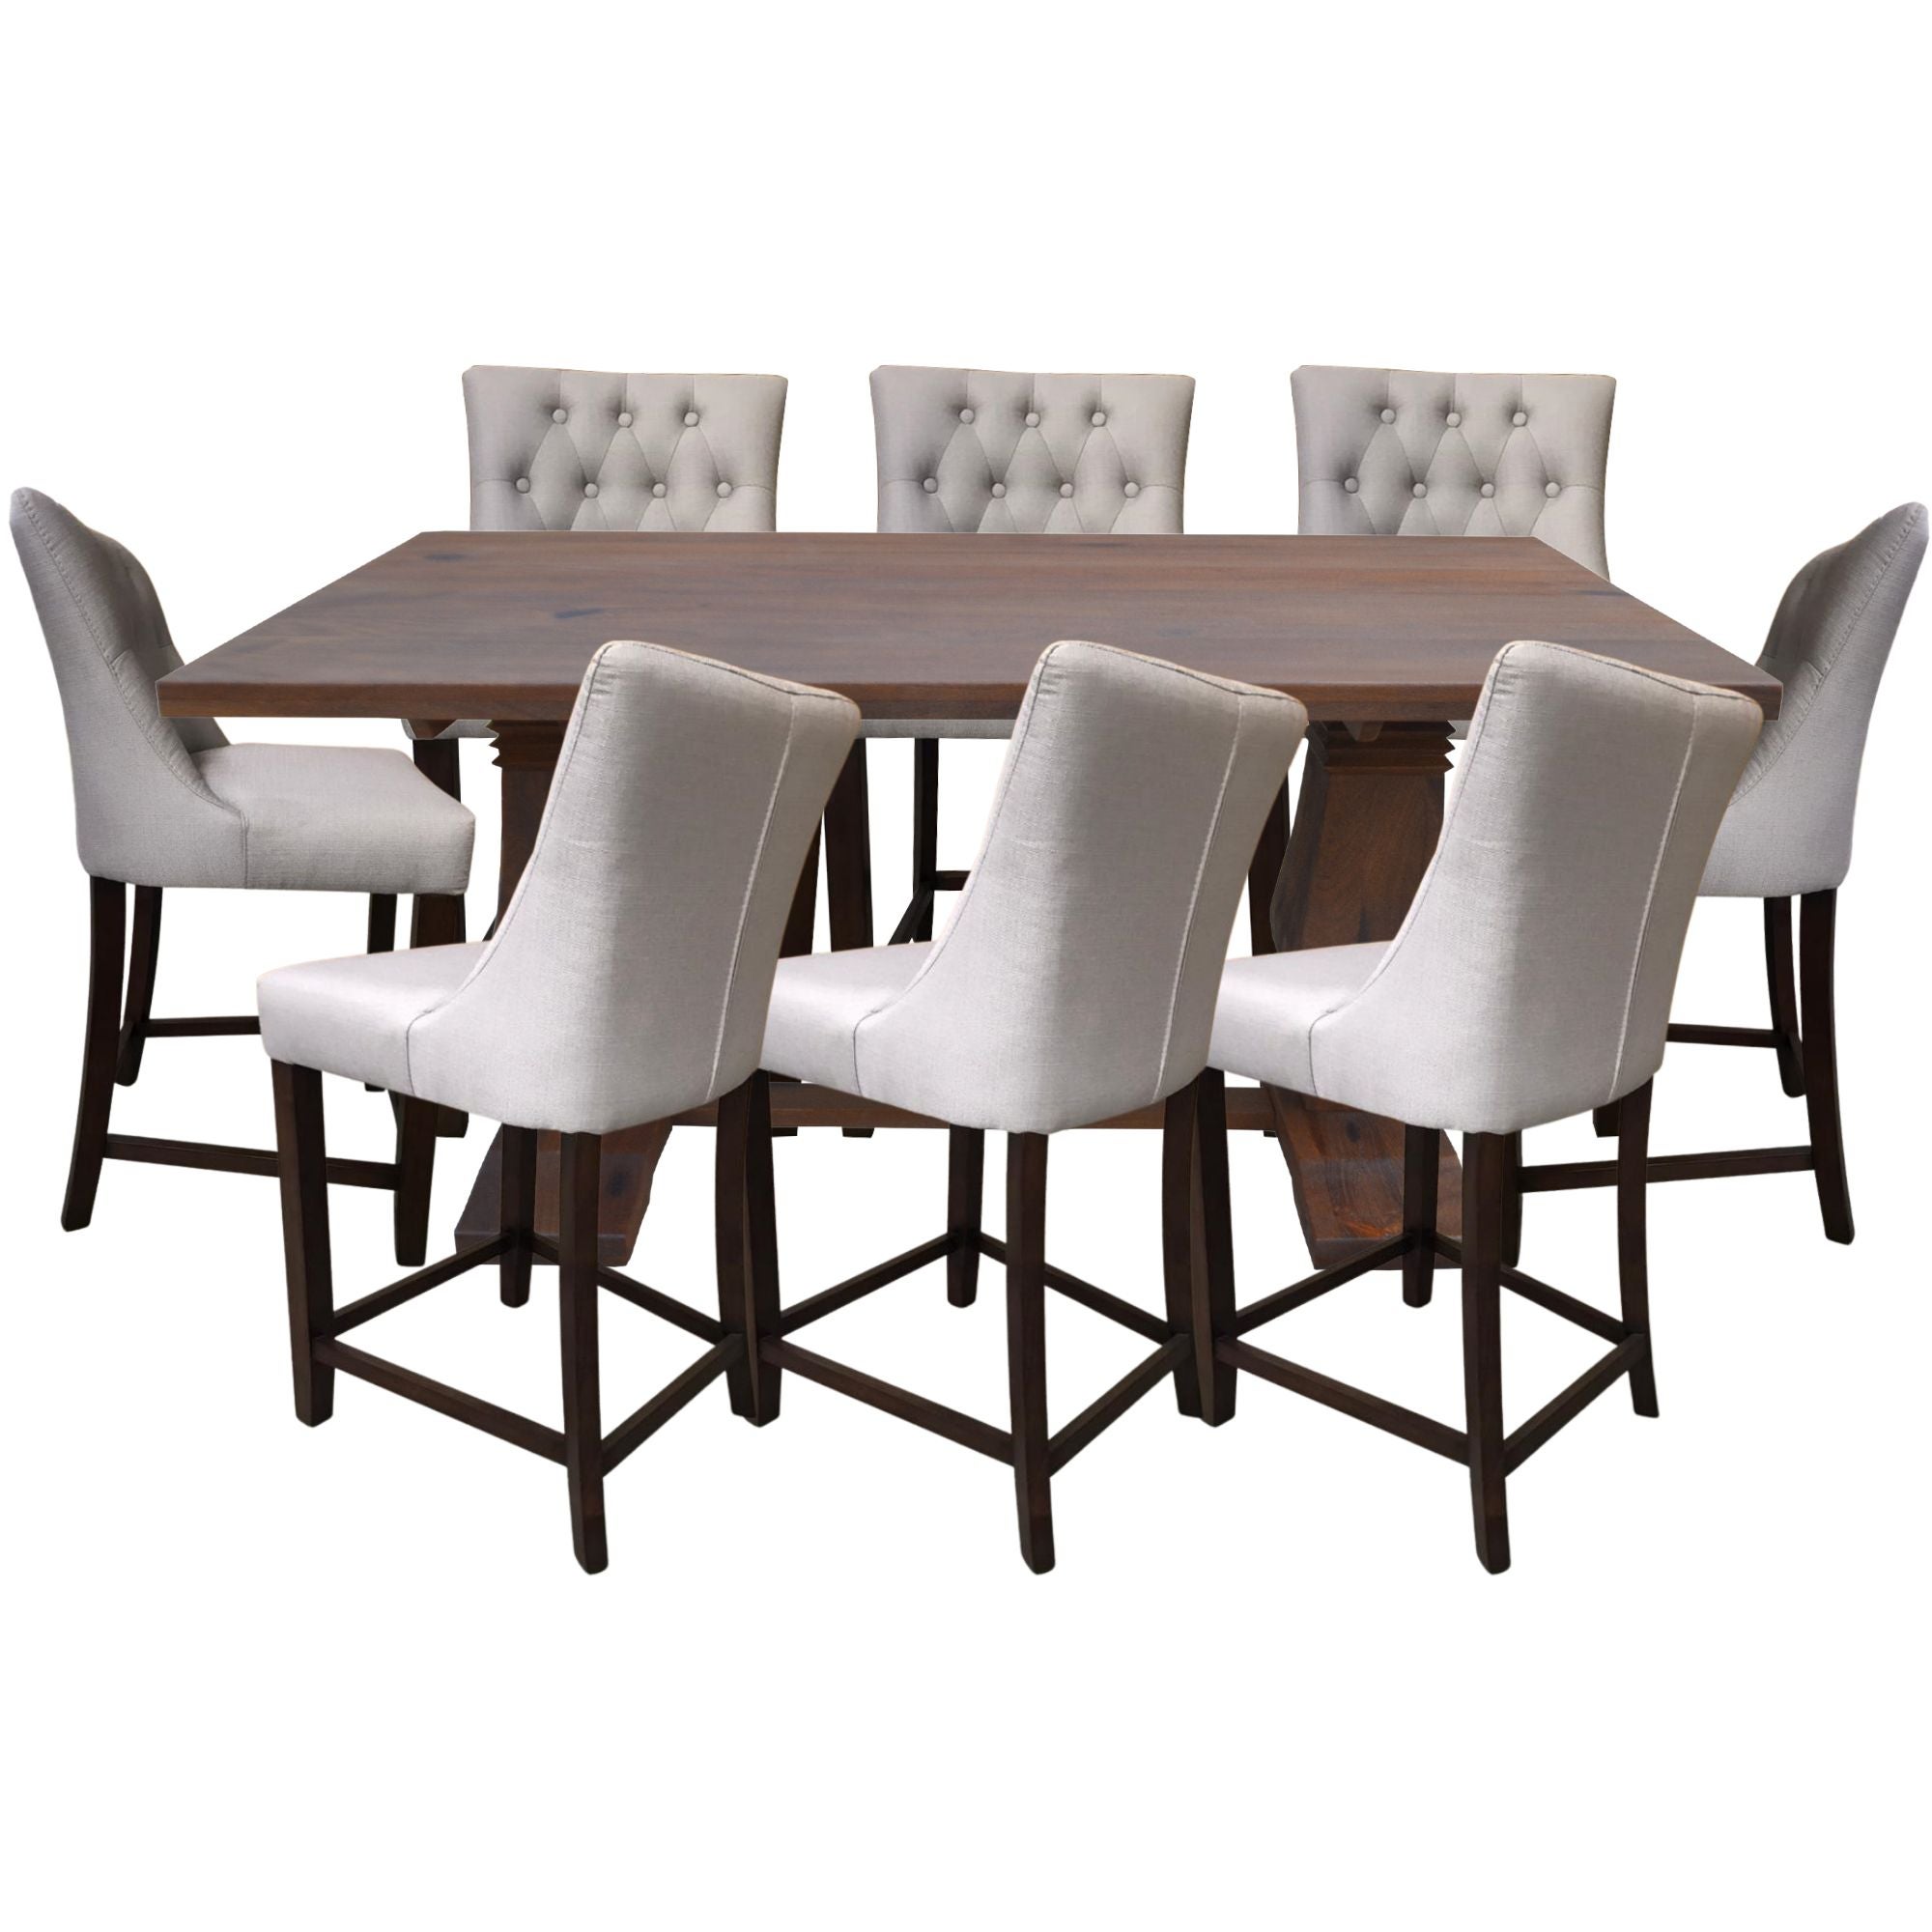 Stanley Coastal Living Retreat 9pc Dining Room Set with